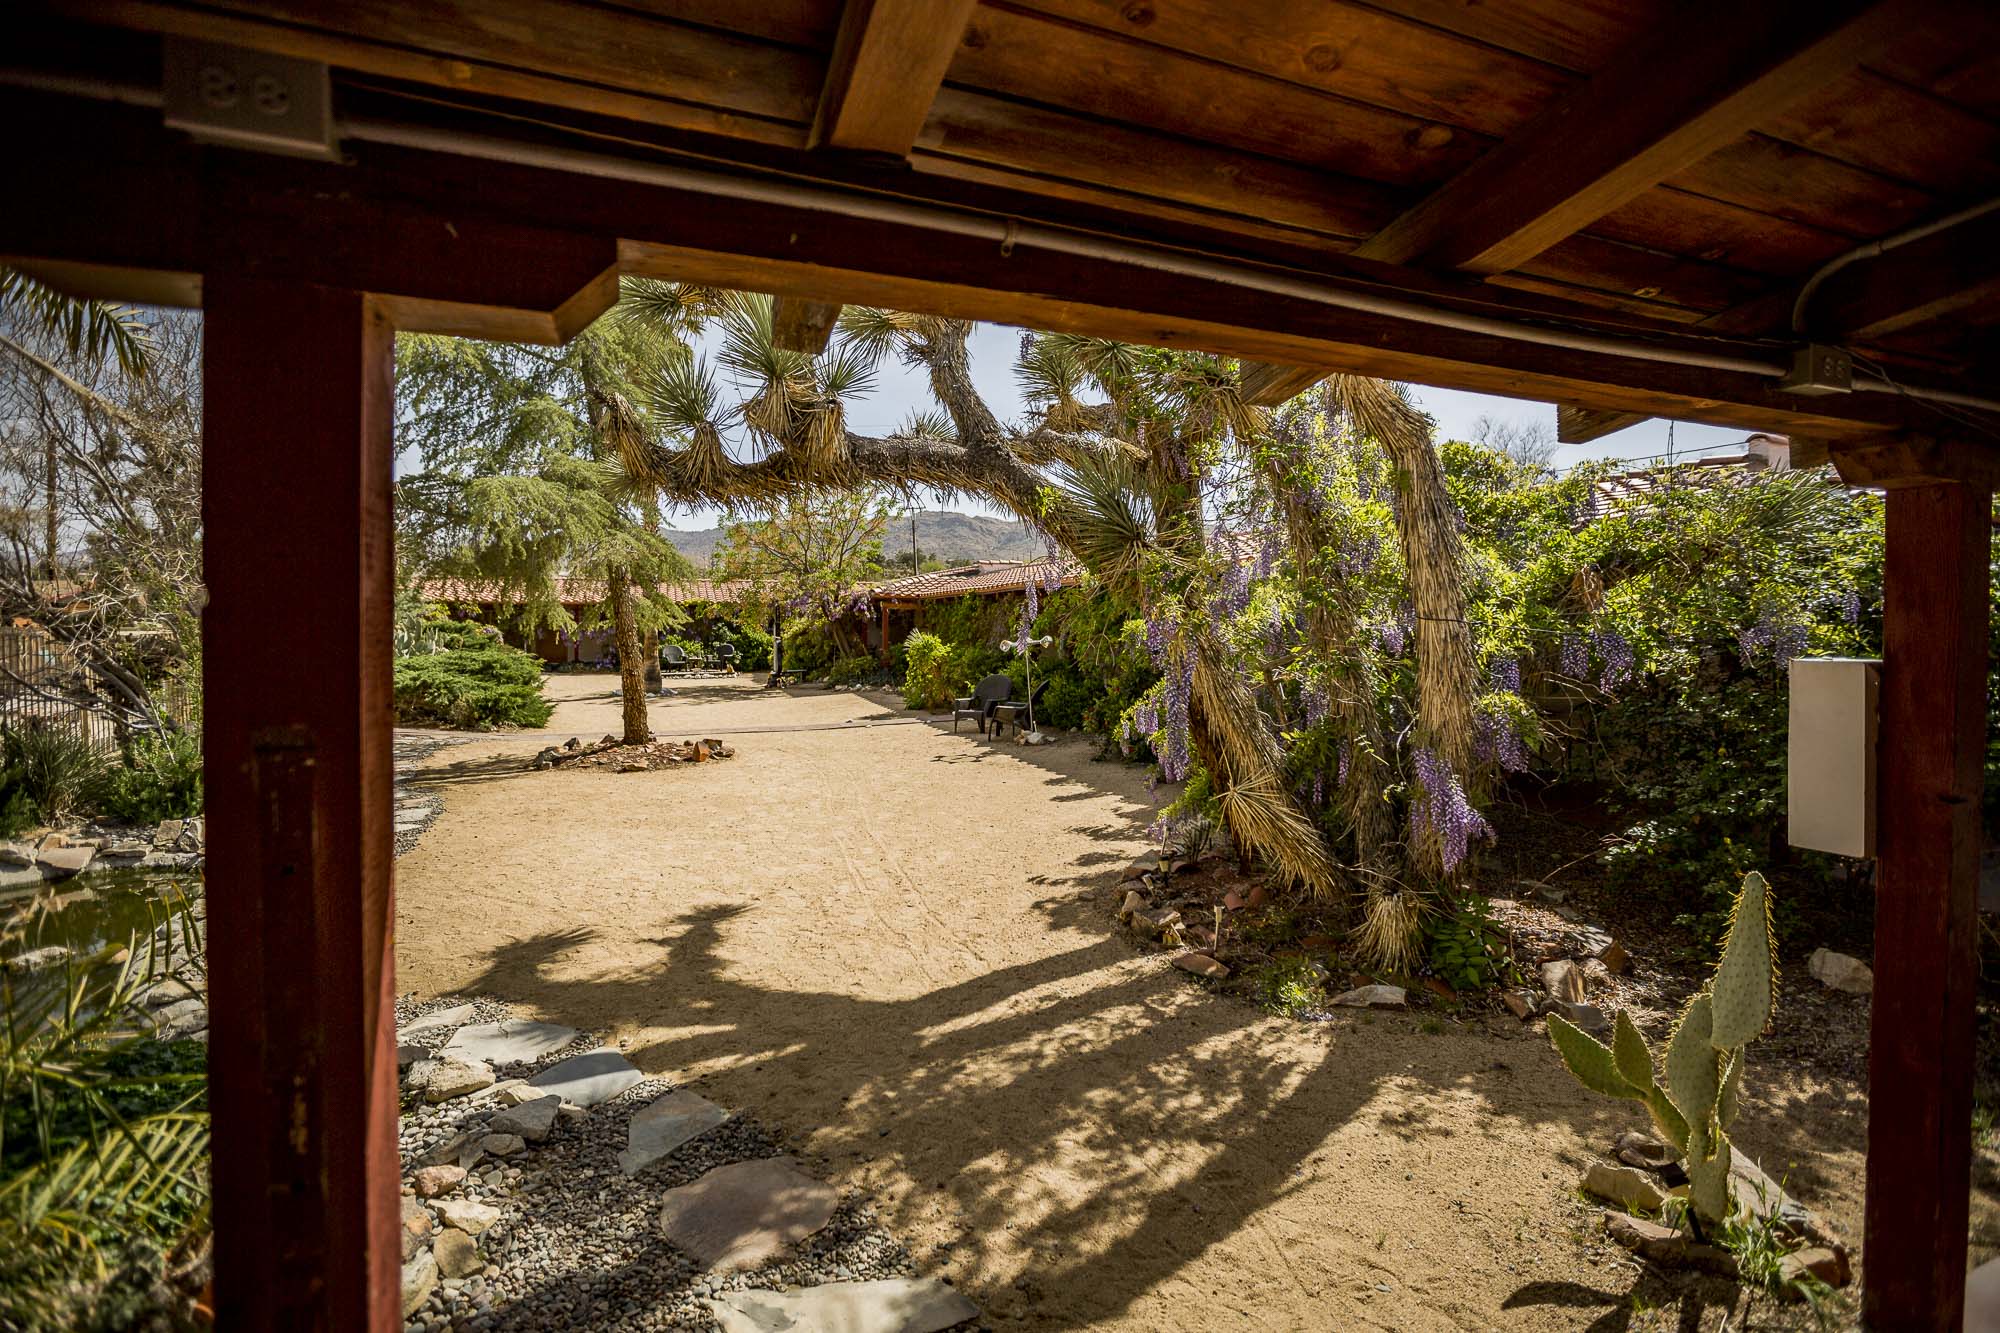 View of a courtyard from under a veranda, with trees, joshua tree and bushes in the distance.